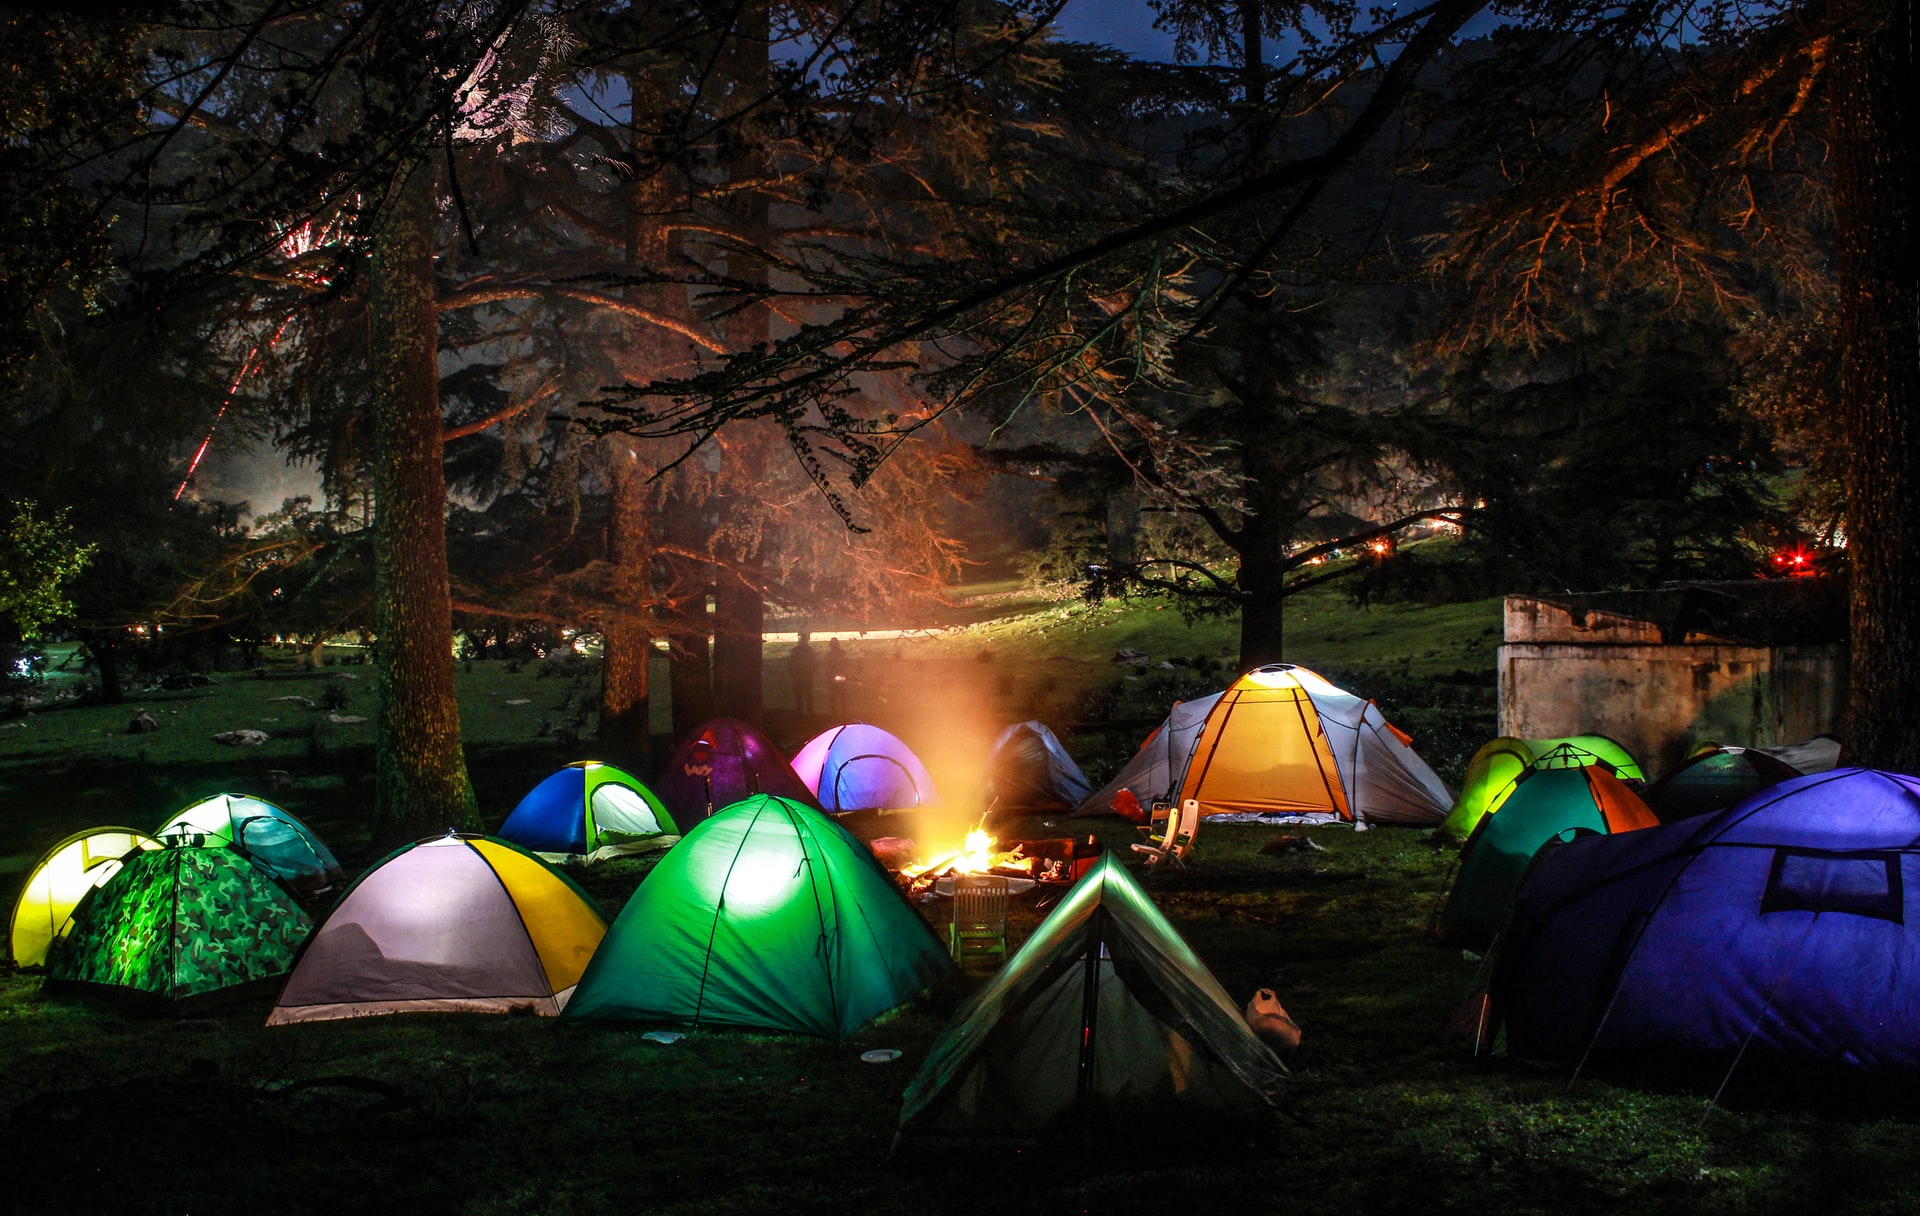 Tents in a campsite at night